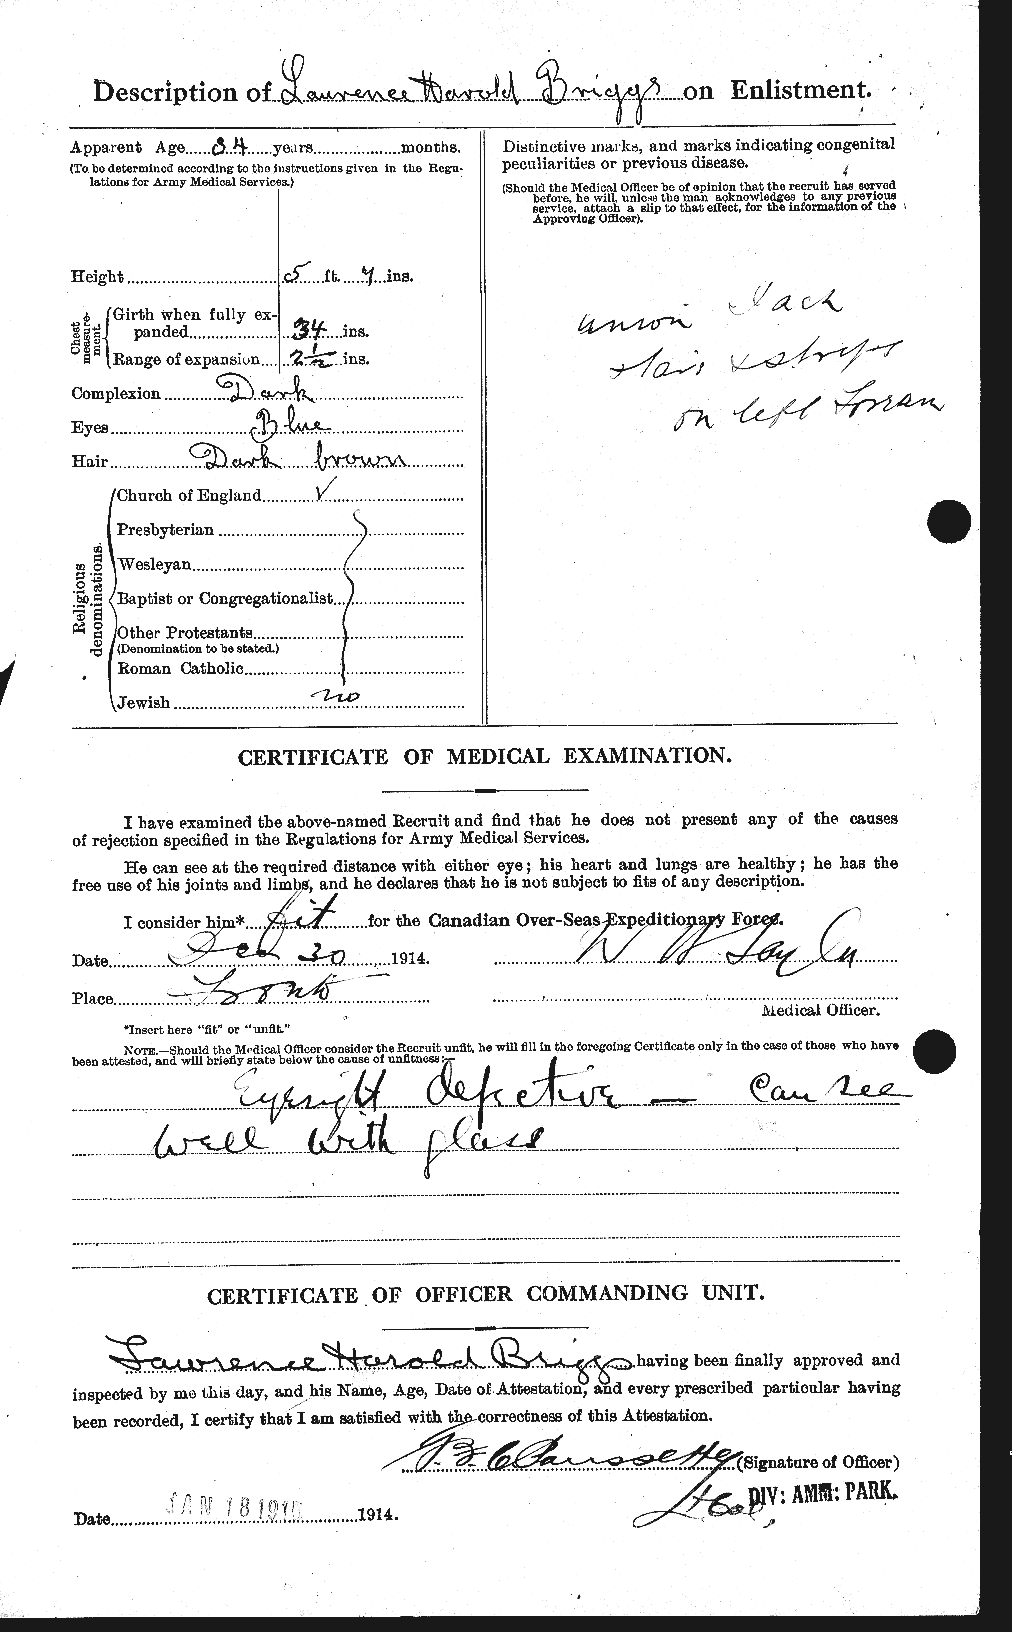 Personnel Records of the First World War - CEF 264070b